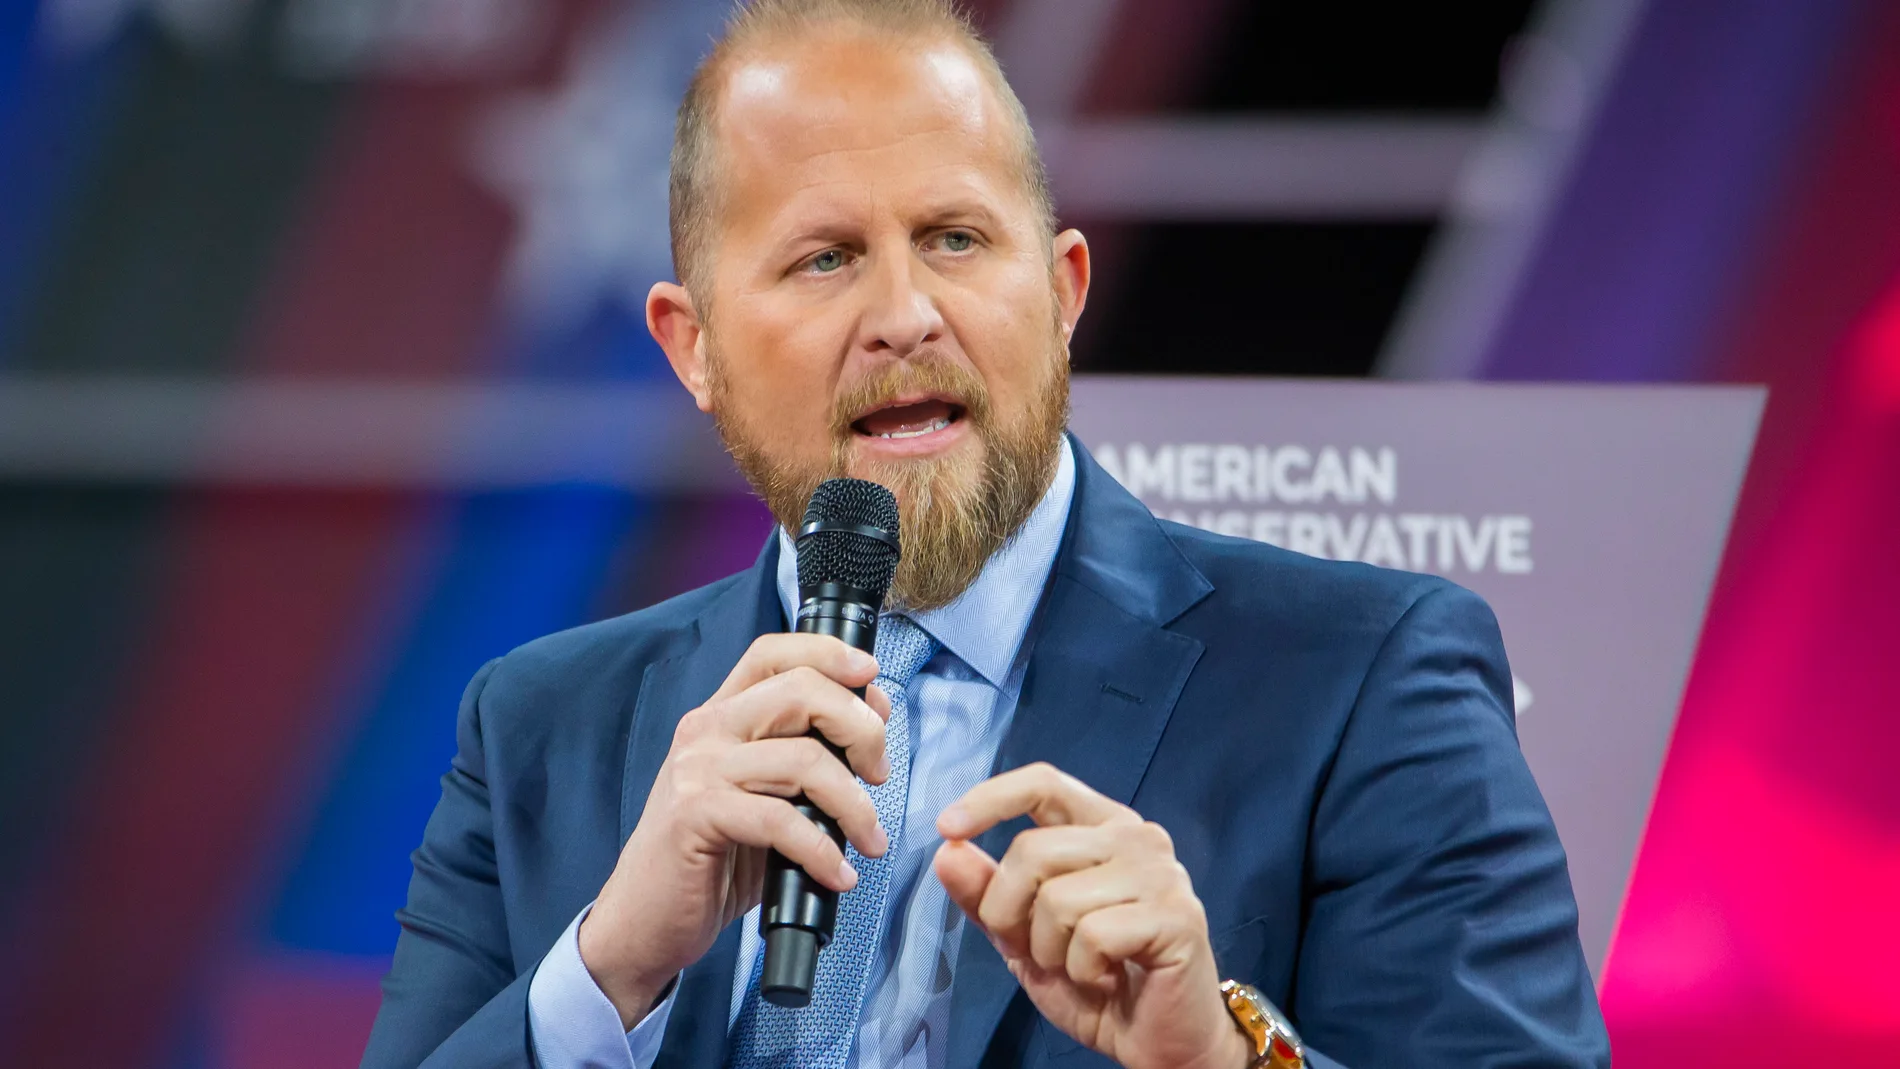 Trump replaces Brad Parscale as his campaign manager with Bill Stepien